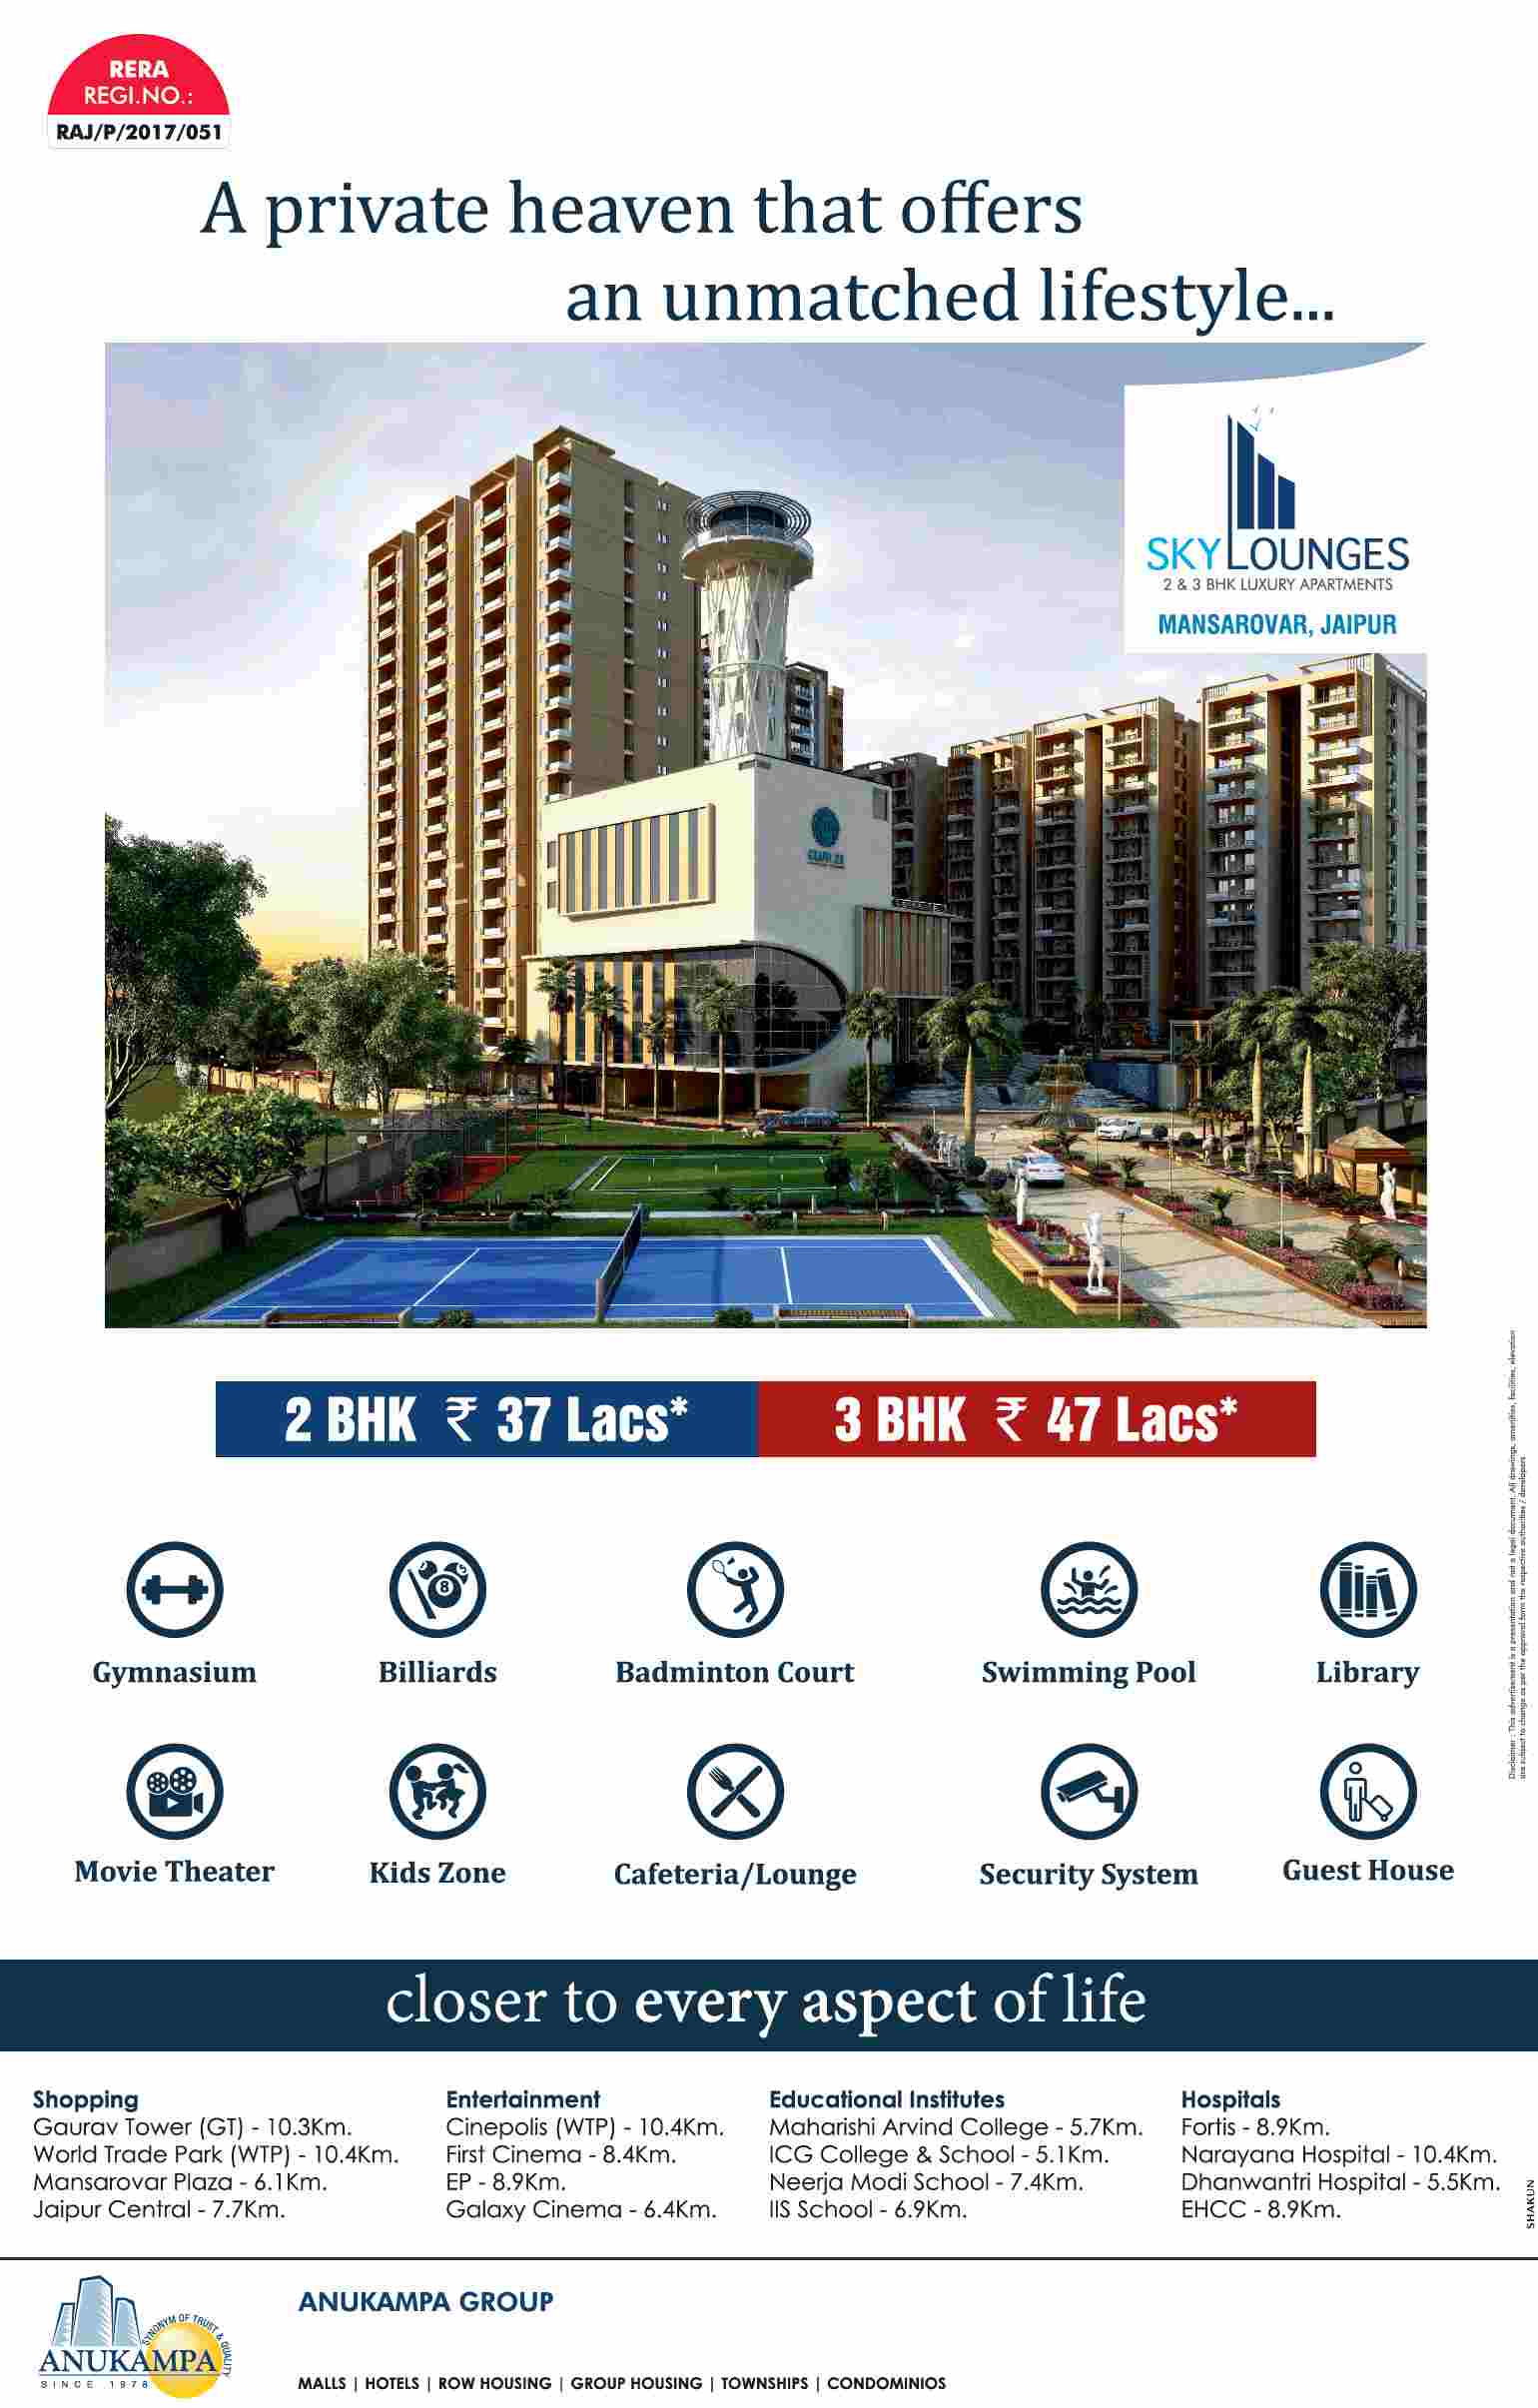 Live in home that offers an unmatched lifestyle at Anukampa Sky Lounges in Jaipur Update